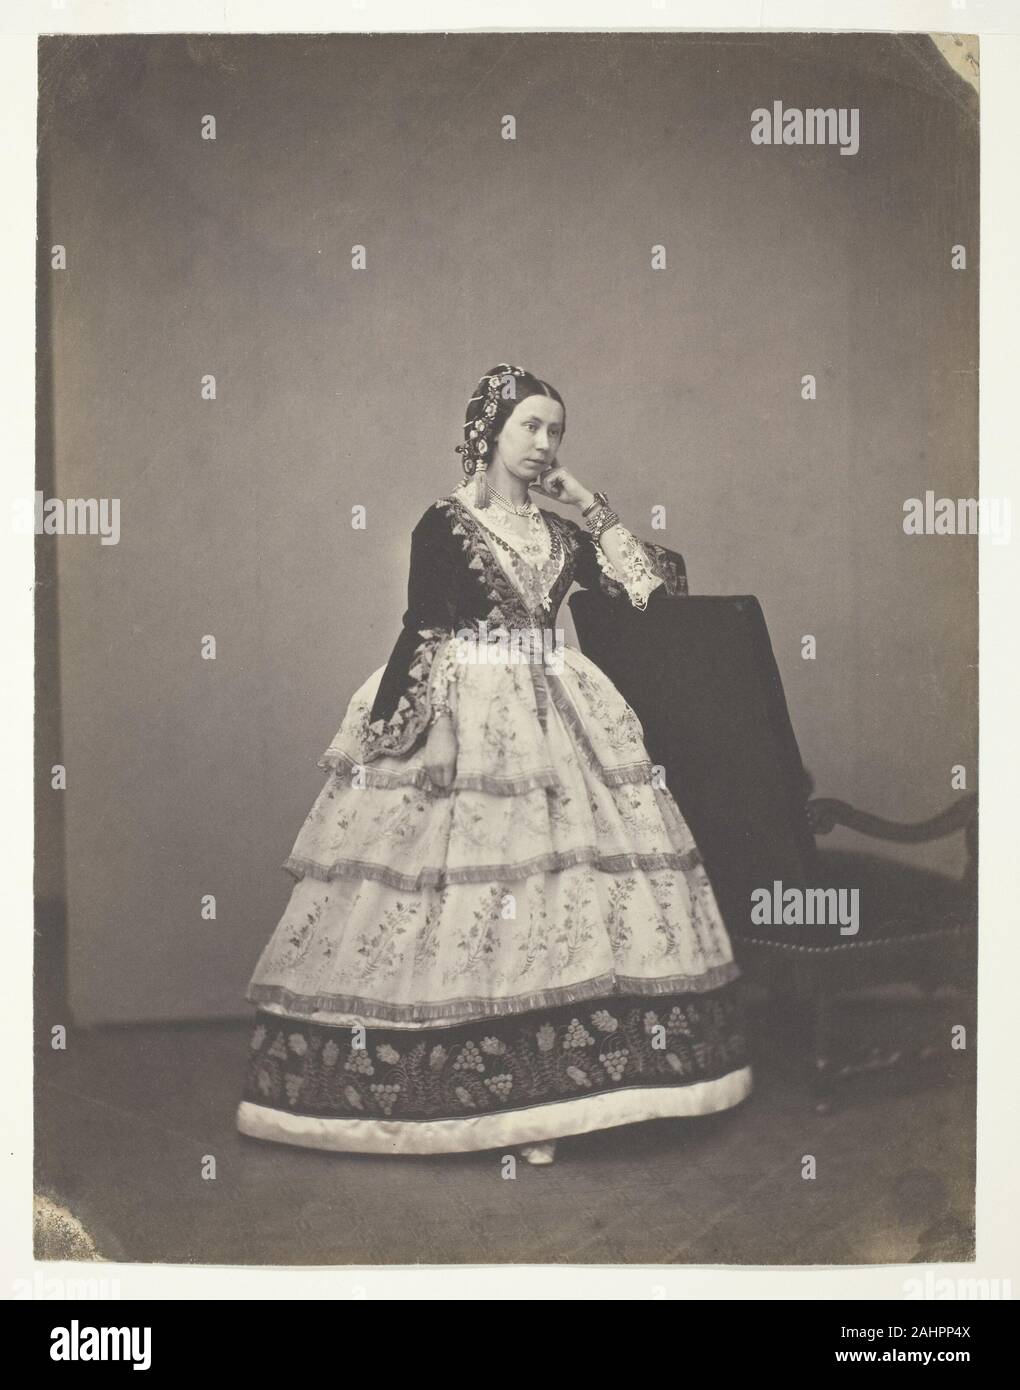 Mayer et Pierson. Madame Carrelle. 1856–1857. France. Salted paper print The studio known as Mayer and Pierson was the joint venture of Pierre-Louis Pierson (1822–1913), and brothers Léopold Ernest Mayer (1817–1865) and Louis Frédéric Mayer (1822–1912), who also had run separate daguerreotype studios in Paris. Working in partnership from 1855, the trio captured portraits of French society and royalty, most notably the family and court of Napoleon III. The studio became known for an objective, unmannered, but elegantly fashionable style that became popular in the French capital. This example sh Stock Photo